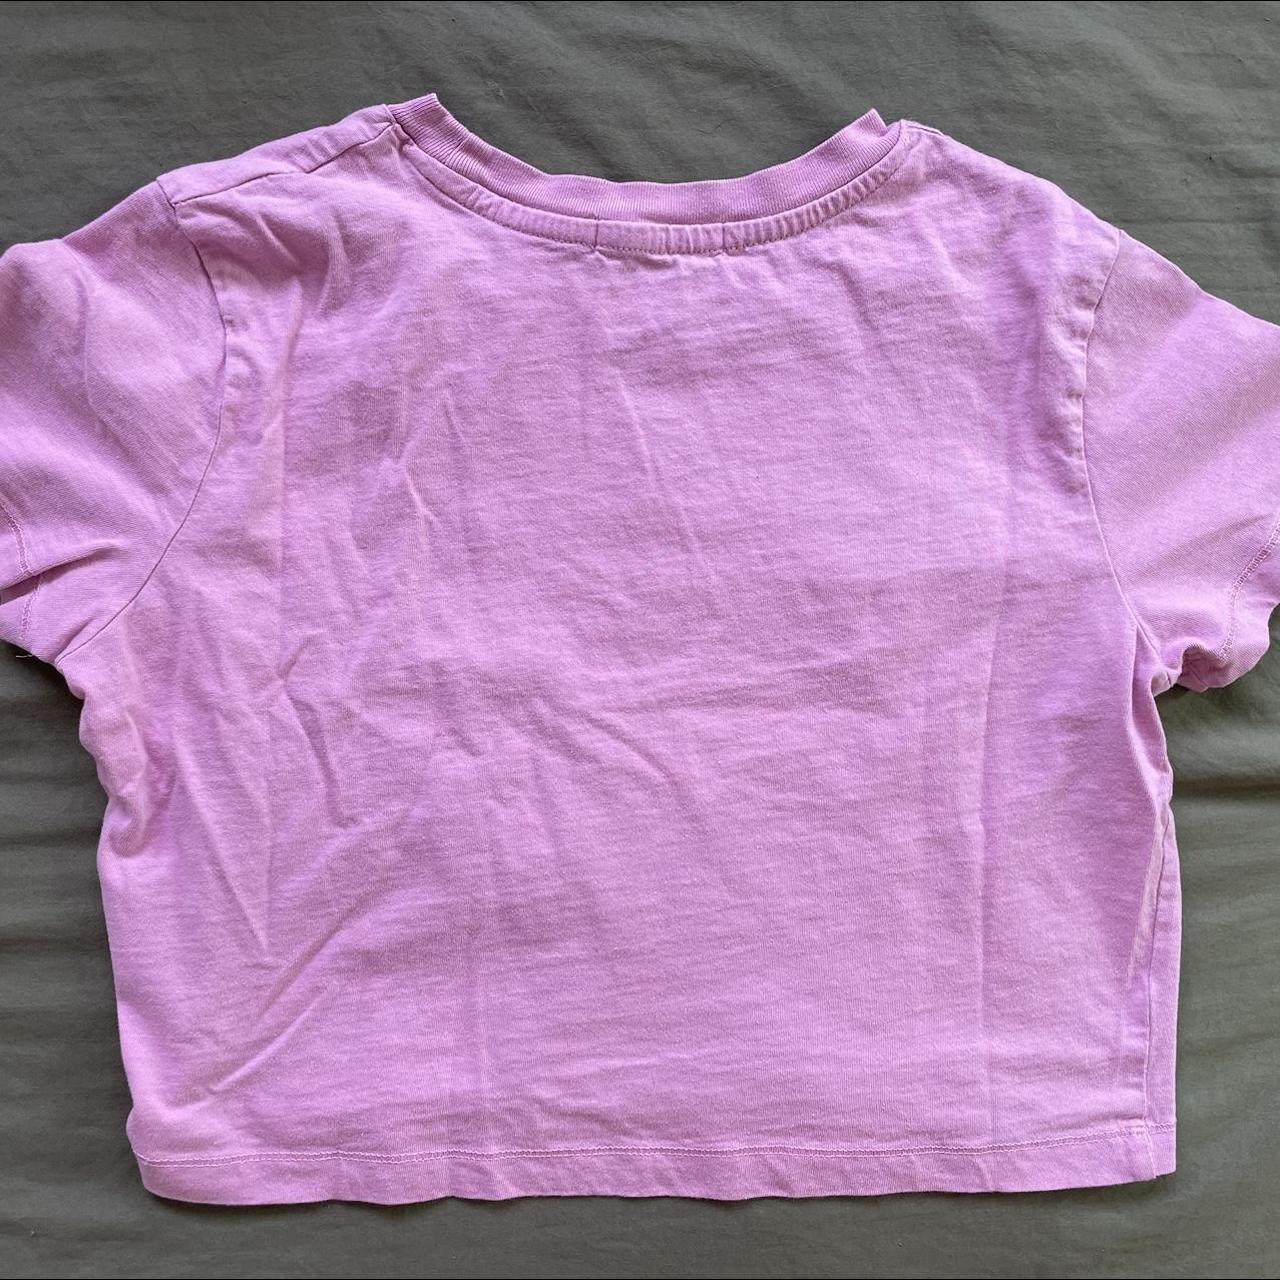 Cotton On Women's Pink and Brown T-shirt (3)